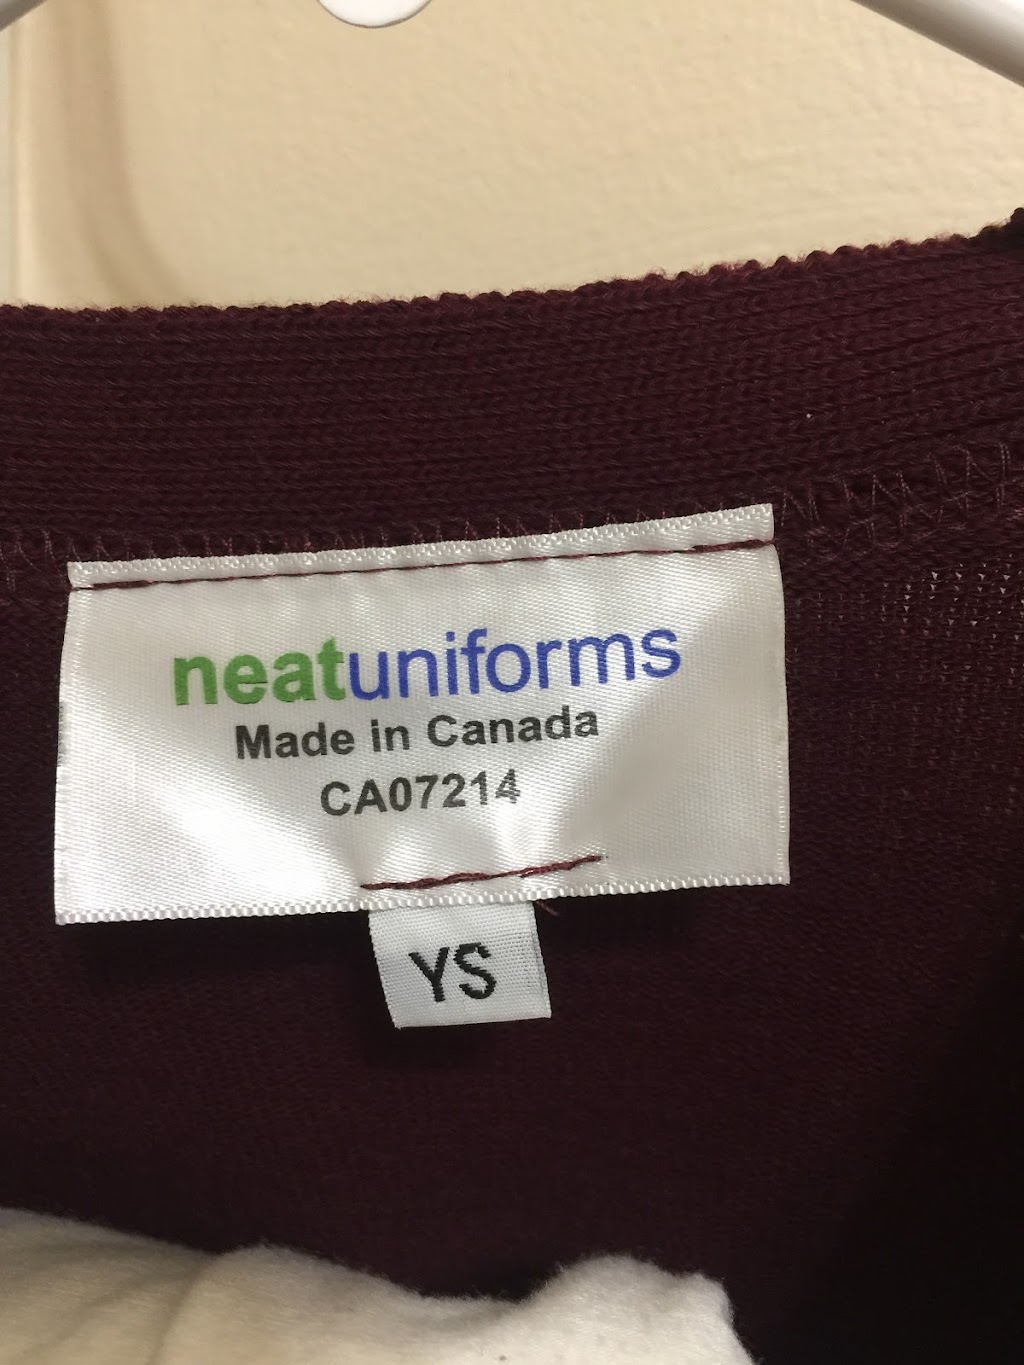 Neat Uniforms | clothing store | 1050 Boundary Rd, Burnaby, BC V5K 4T3, Canada | 6042057560 OR +1 604-205-7560